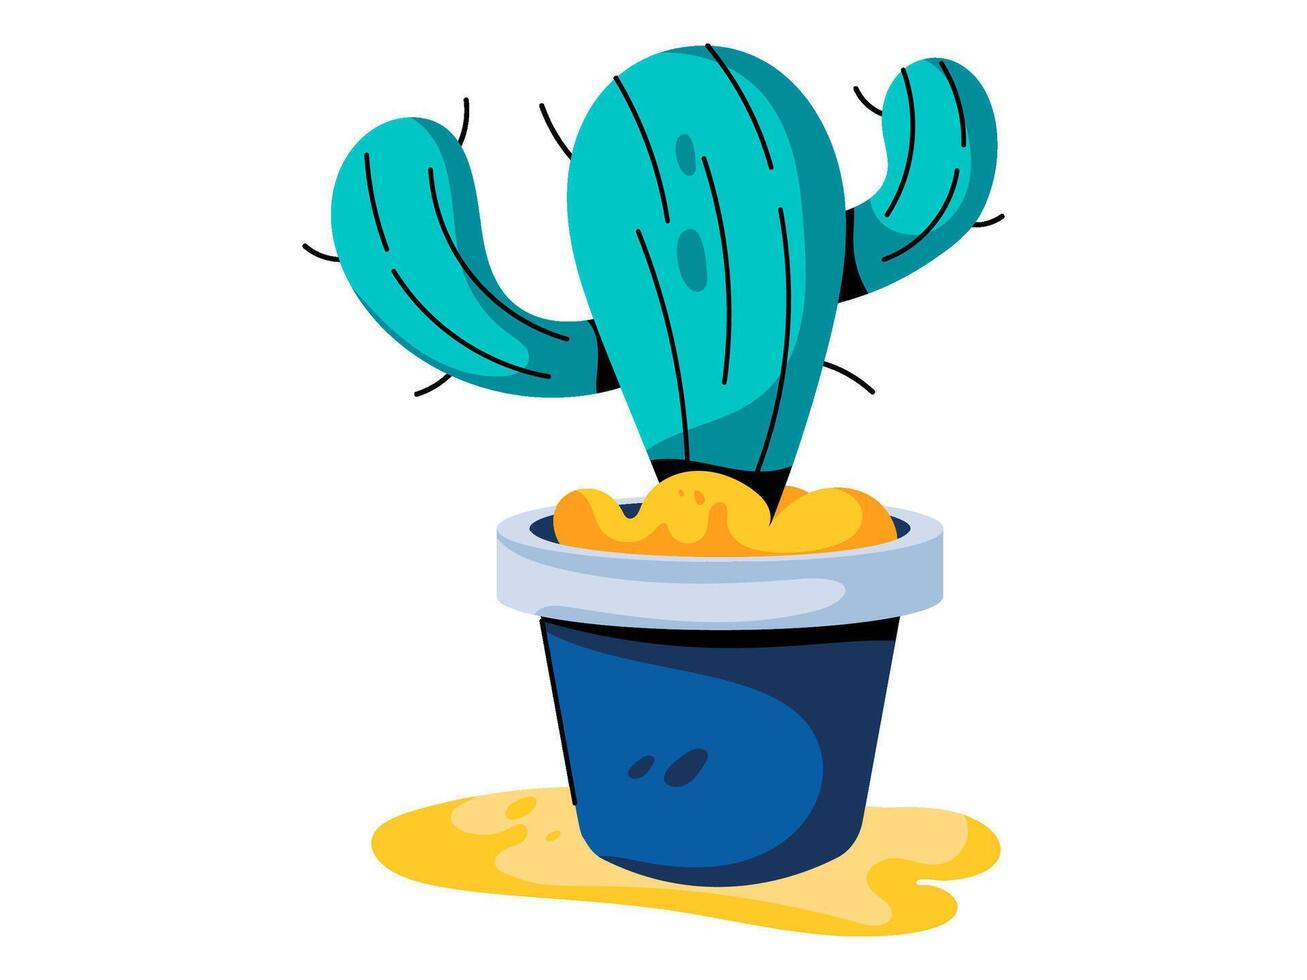 cactus design with modern illustration concept style for badge farm agriculture sticker illustration vector